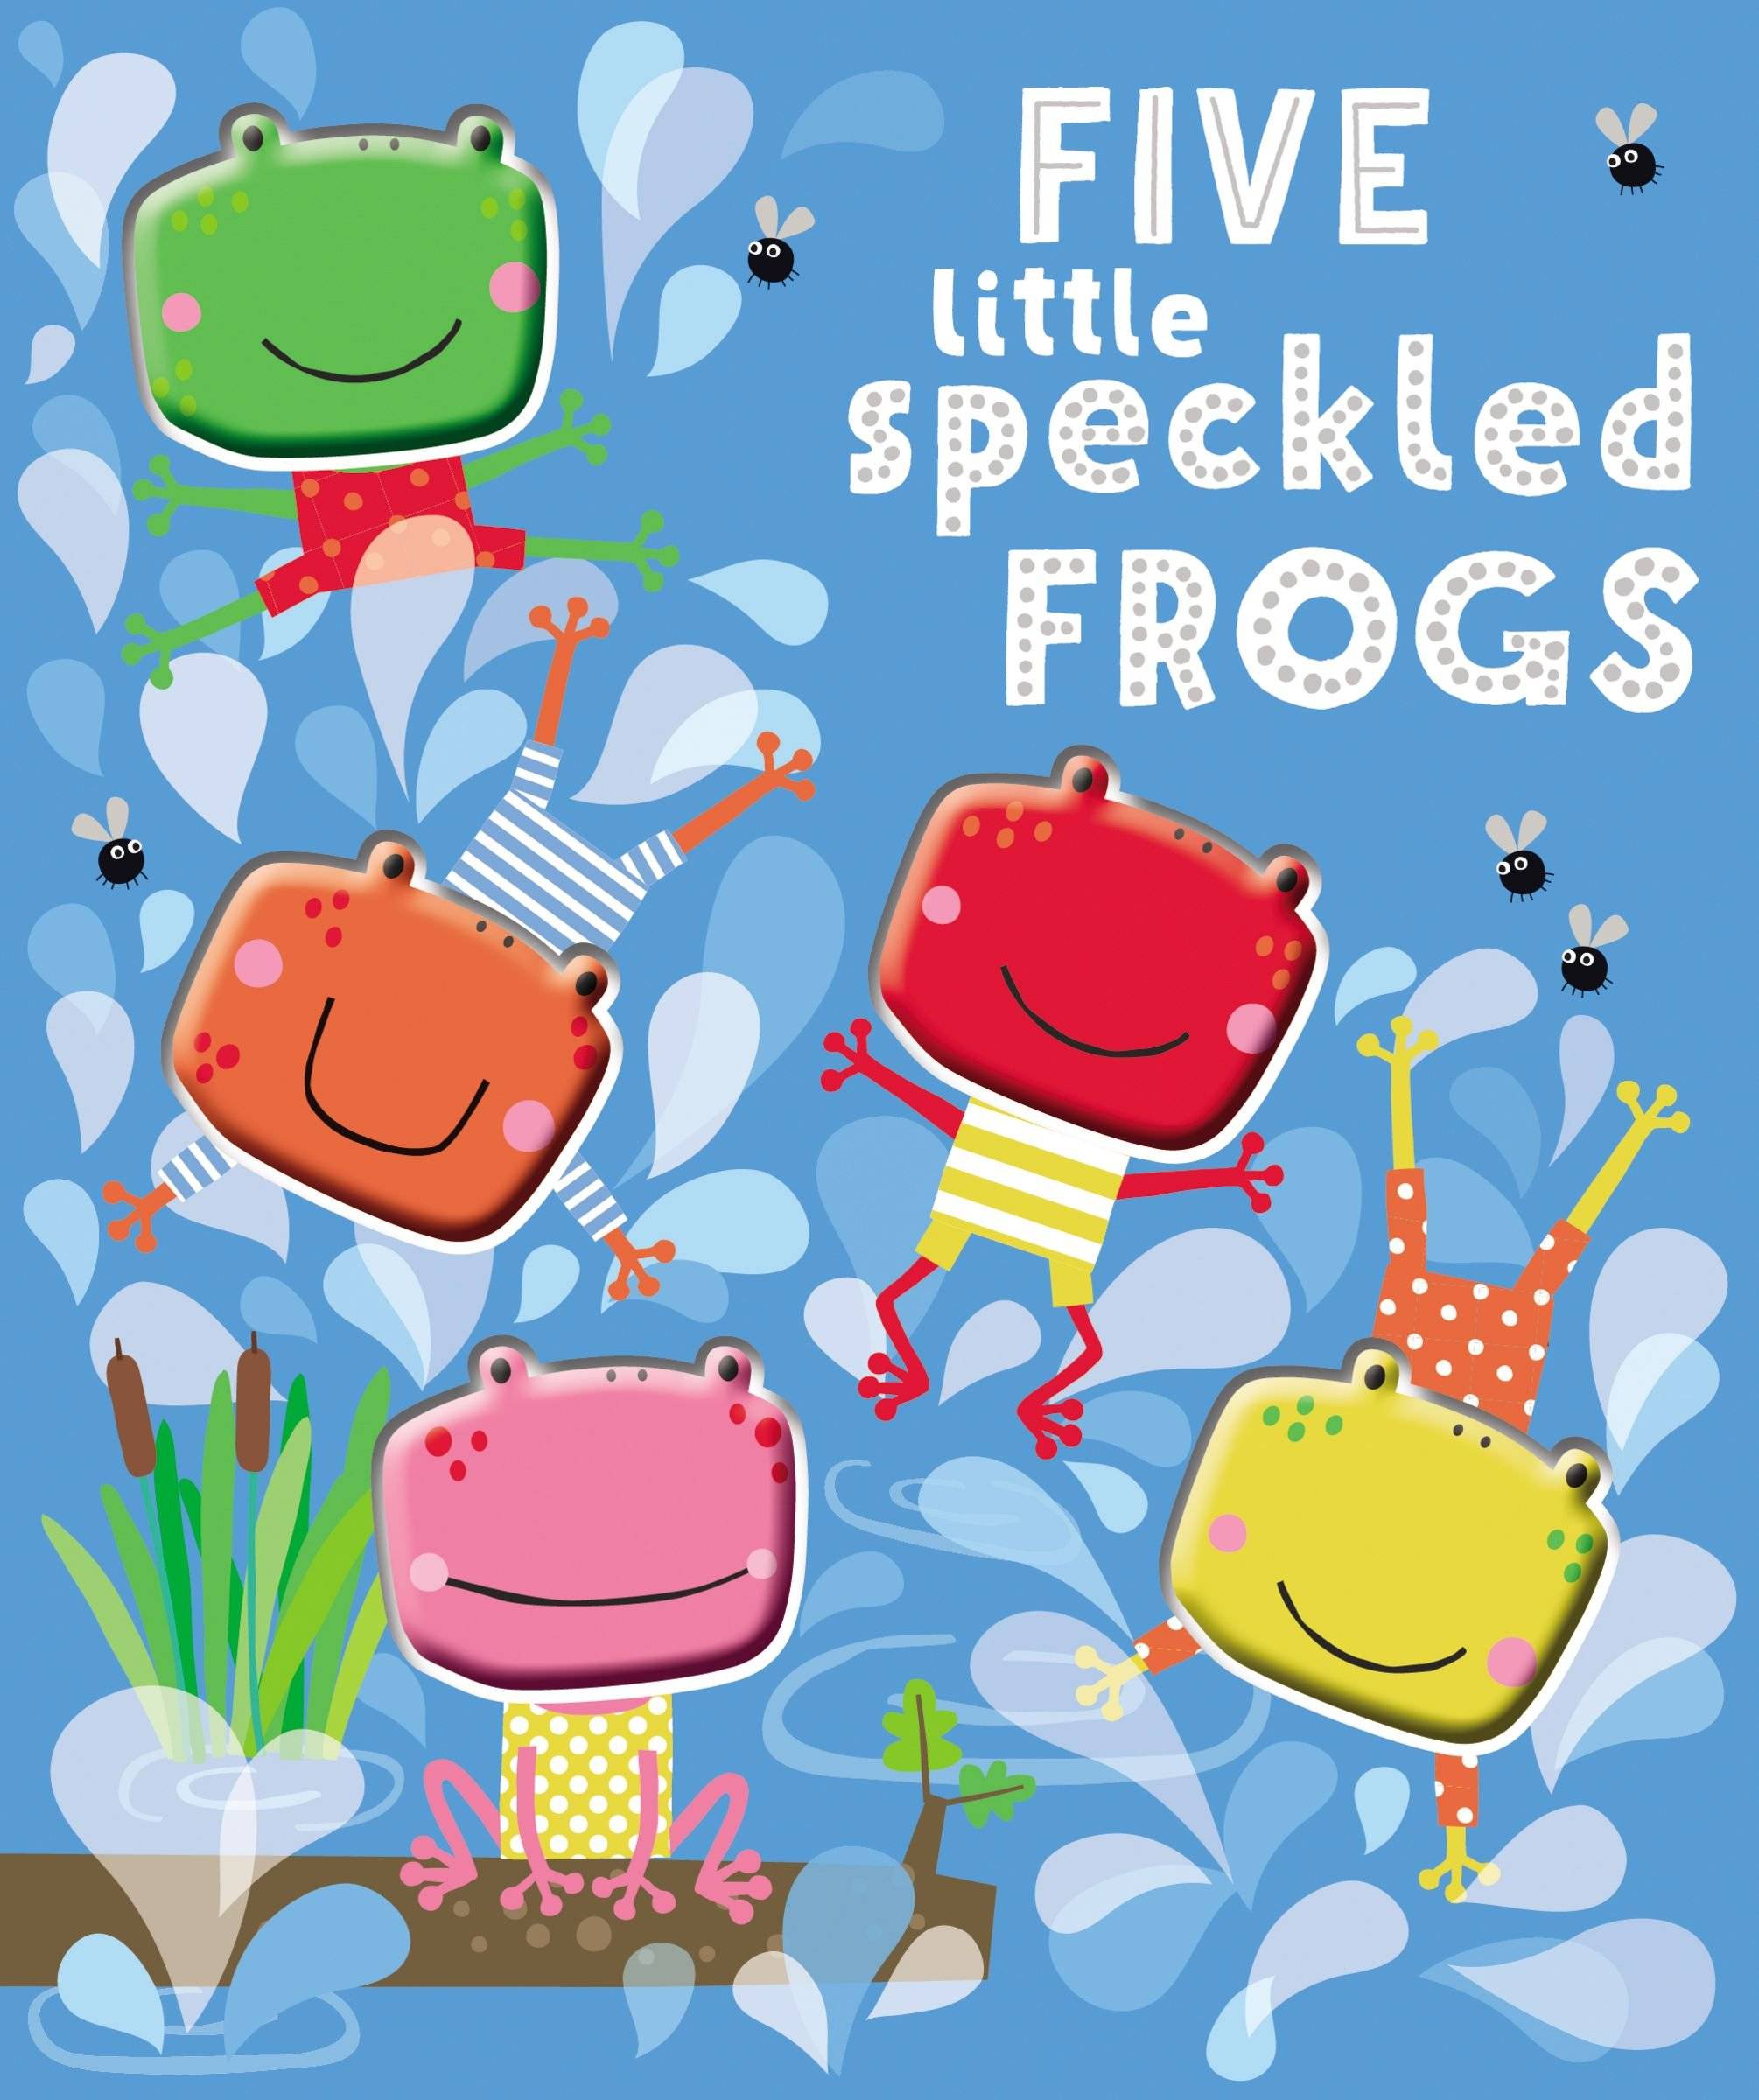 IMG : Five Little Speckled Frogs